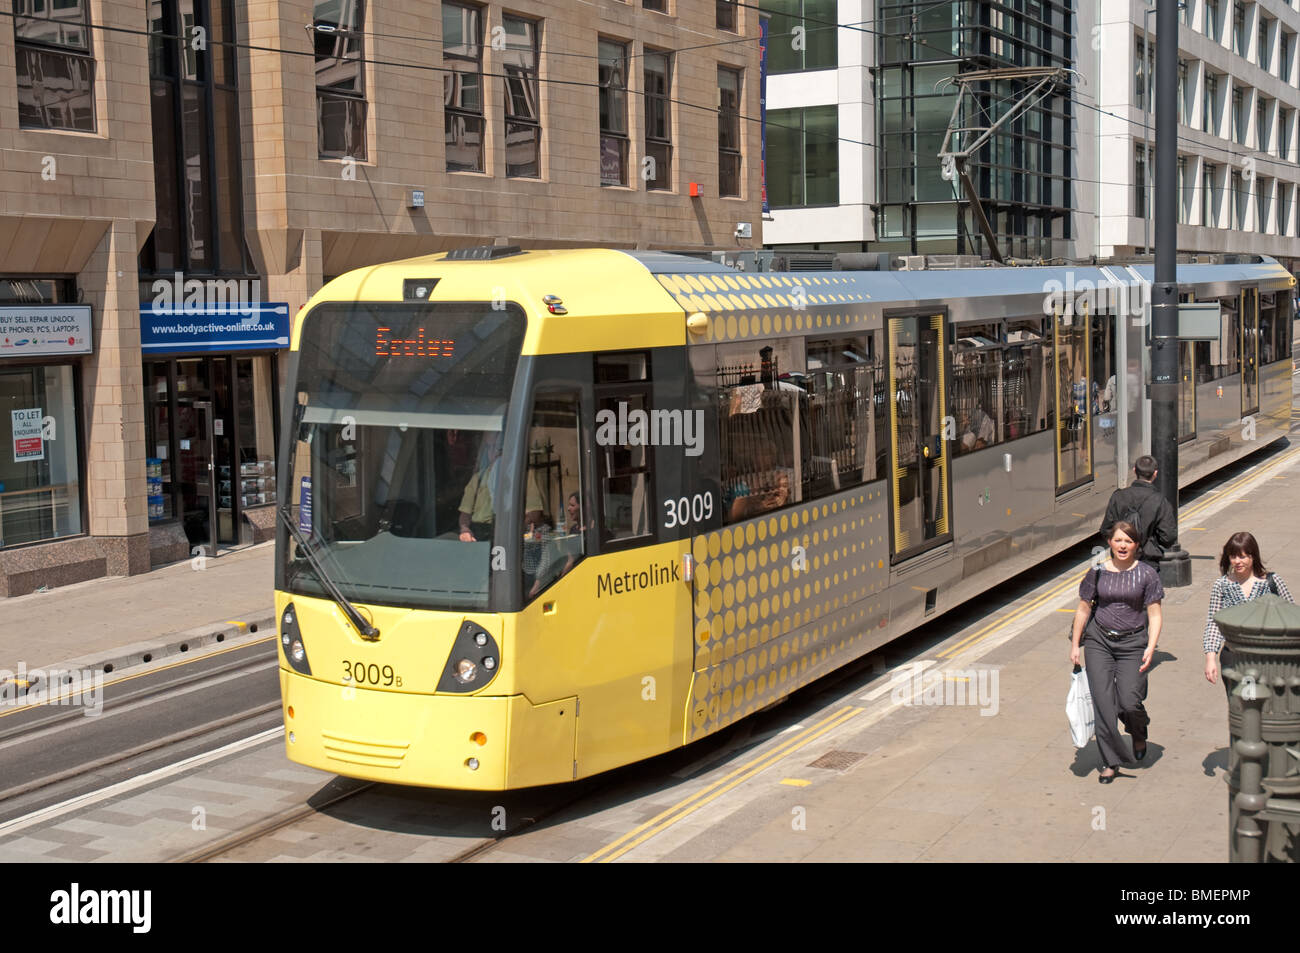 Metrolink tram traveling along Mosley Street in Manchester city centre. Stock Photo